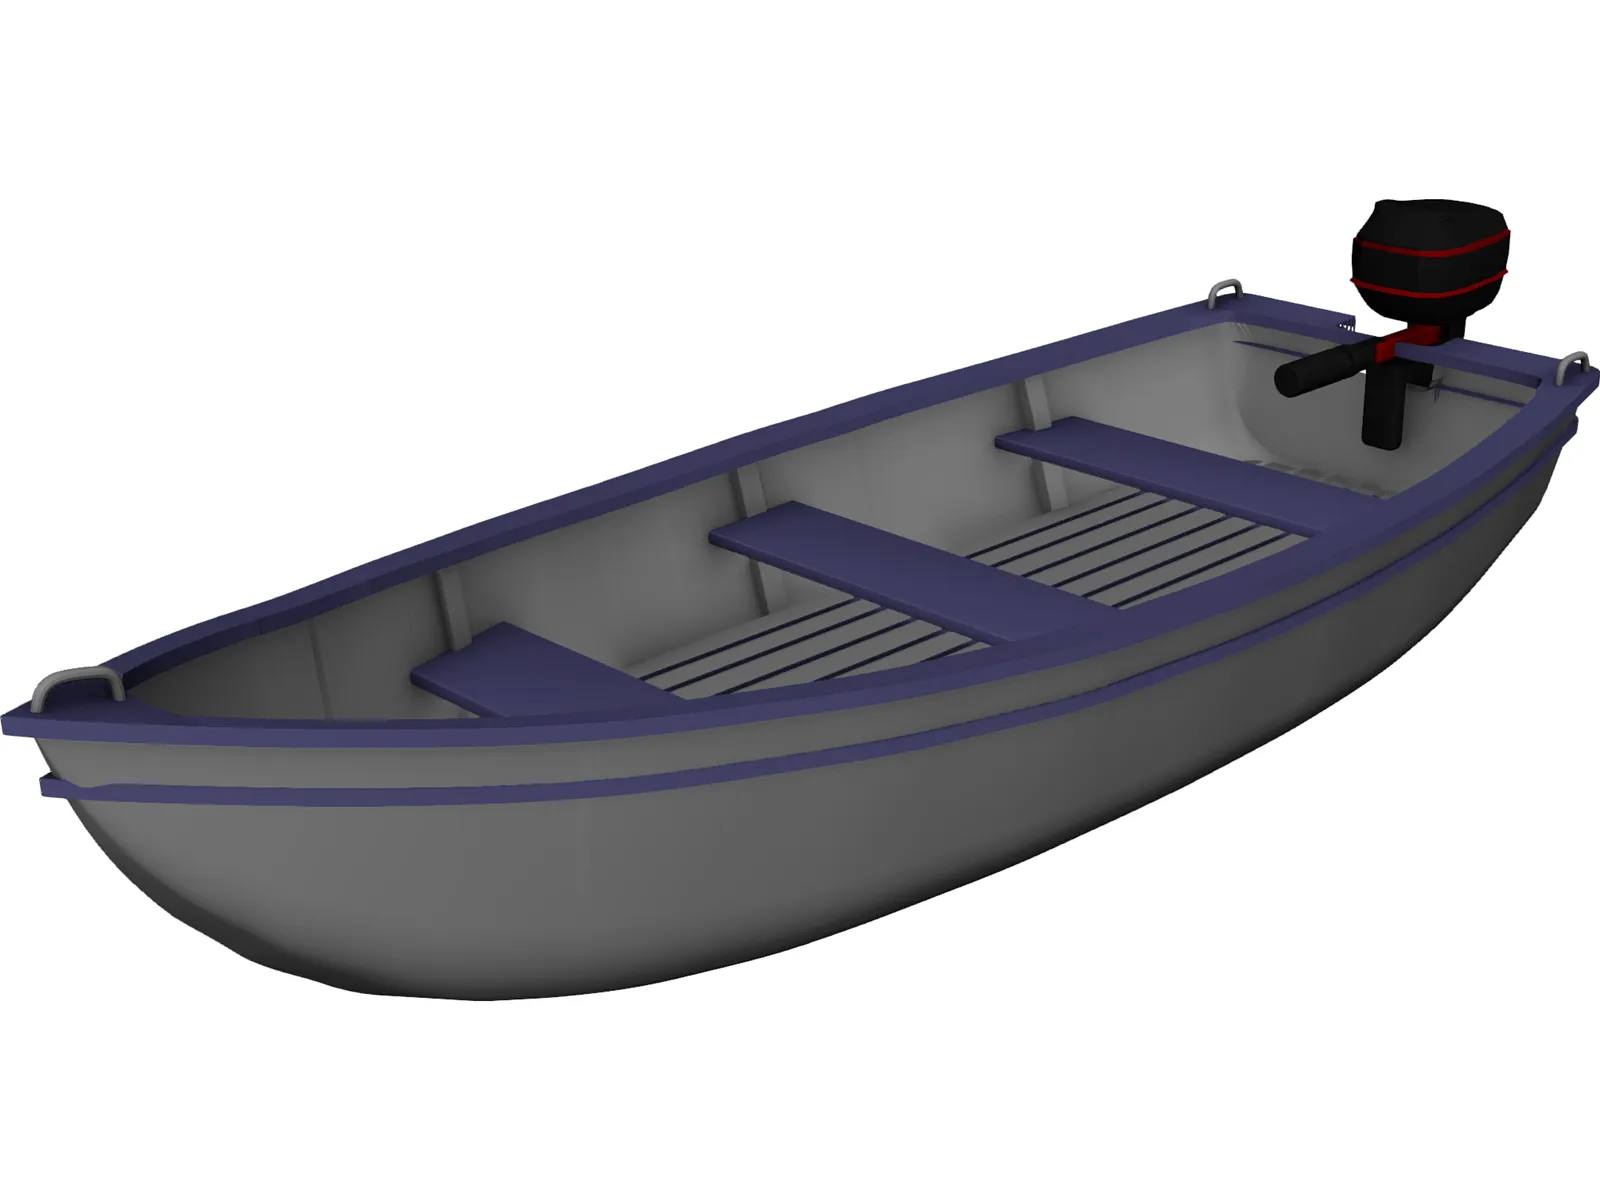 Boat with Outdoor Motor 3D Model